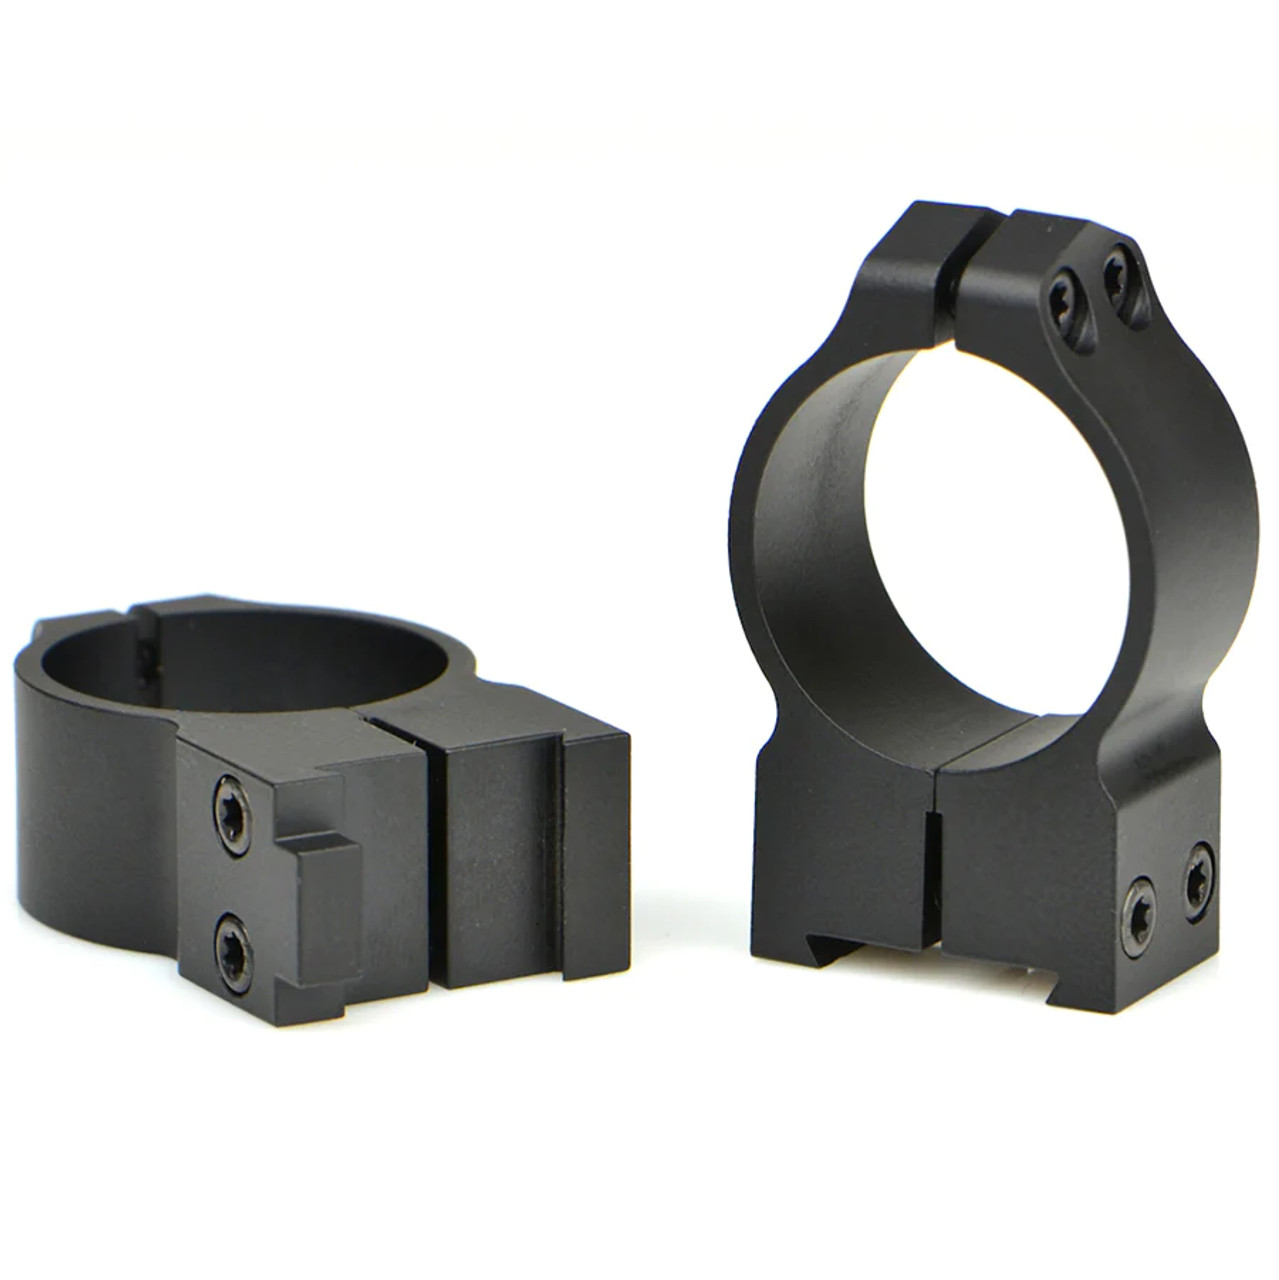 CZ Direct fit upgrade Designed to fit the 19mm 550 integral dovetails, Warne's Maxima CZ rings are a solid steel, vertically split ring that handle even the most punishing recoil, or large, heavy scopes. Since each firearm manufacturer has their own proprietary mounting rail design, each ring model must be machined to exacting tolerances for proper fit and function. Because of this, the Warne CZ Rings are able to fit right onto the receiver's dovetail with no need for a mounting base. The CZ Fixed Rings fit the CZ550 receiver design (19mm dovetail) model and utilize 4 T-15 Torx style socket cap screws for secure and permanent optics mounting.
Permanently attaches to firearm's dovetail.
CZ specific recoil pin for positive engagement of ring to receiver dovetail.
Rings securely mount around scope using 4 Torx style T-15 socket cap screws.